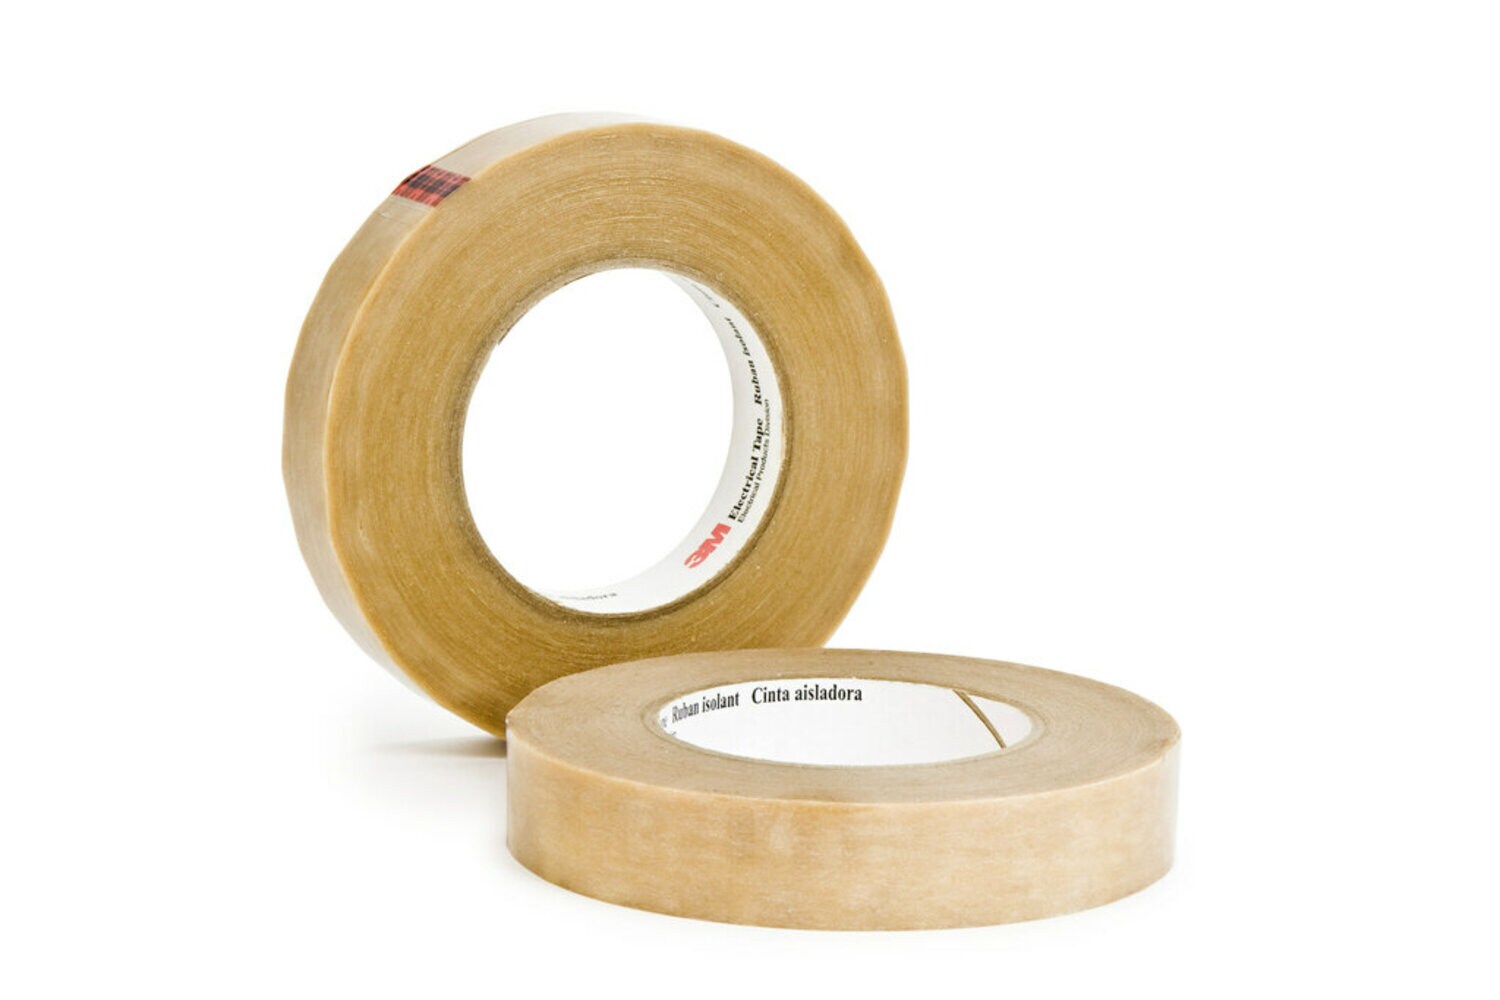 7010297507 - 3M Composite Film Electrical Tape 44HT, 1/2 in x 90 yd, 72 Rolls/Case